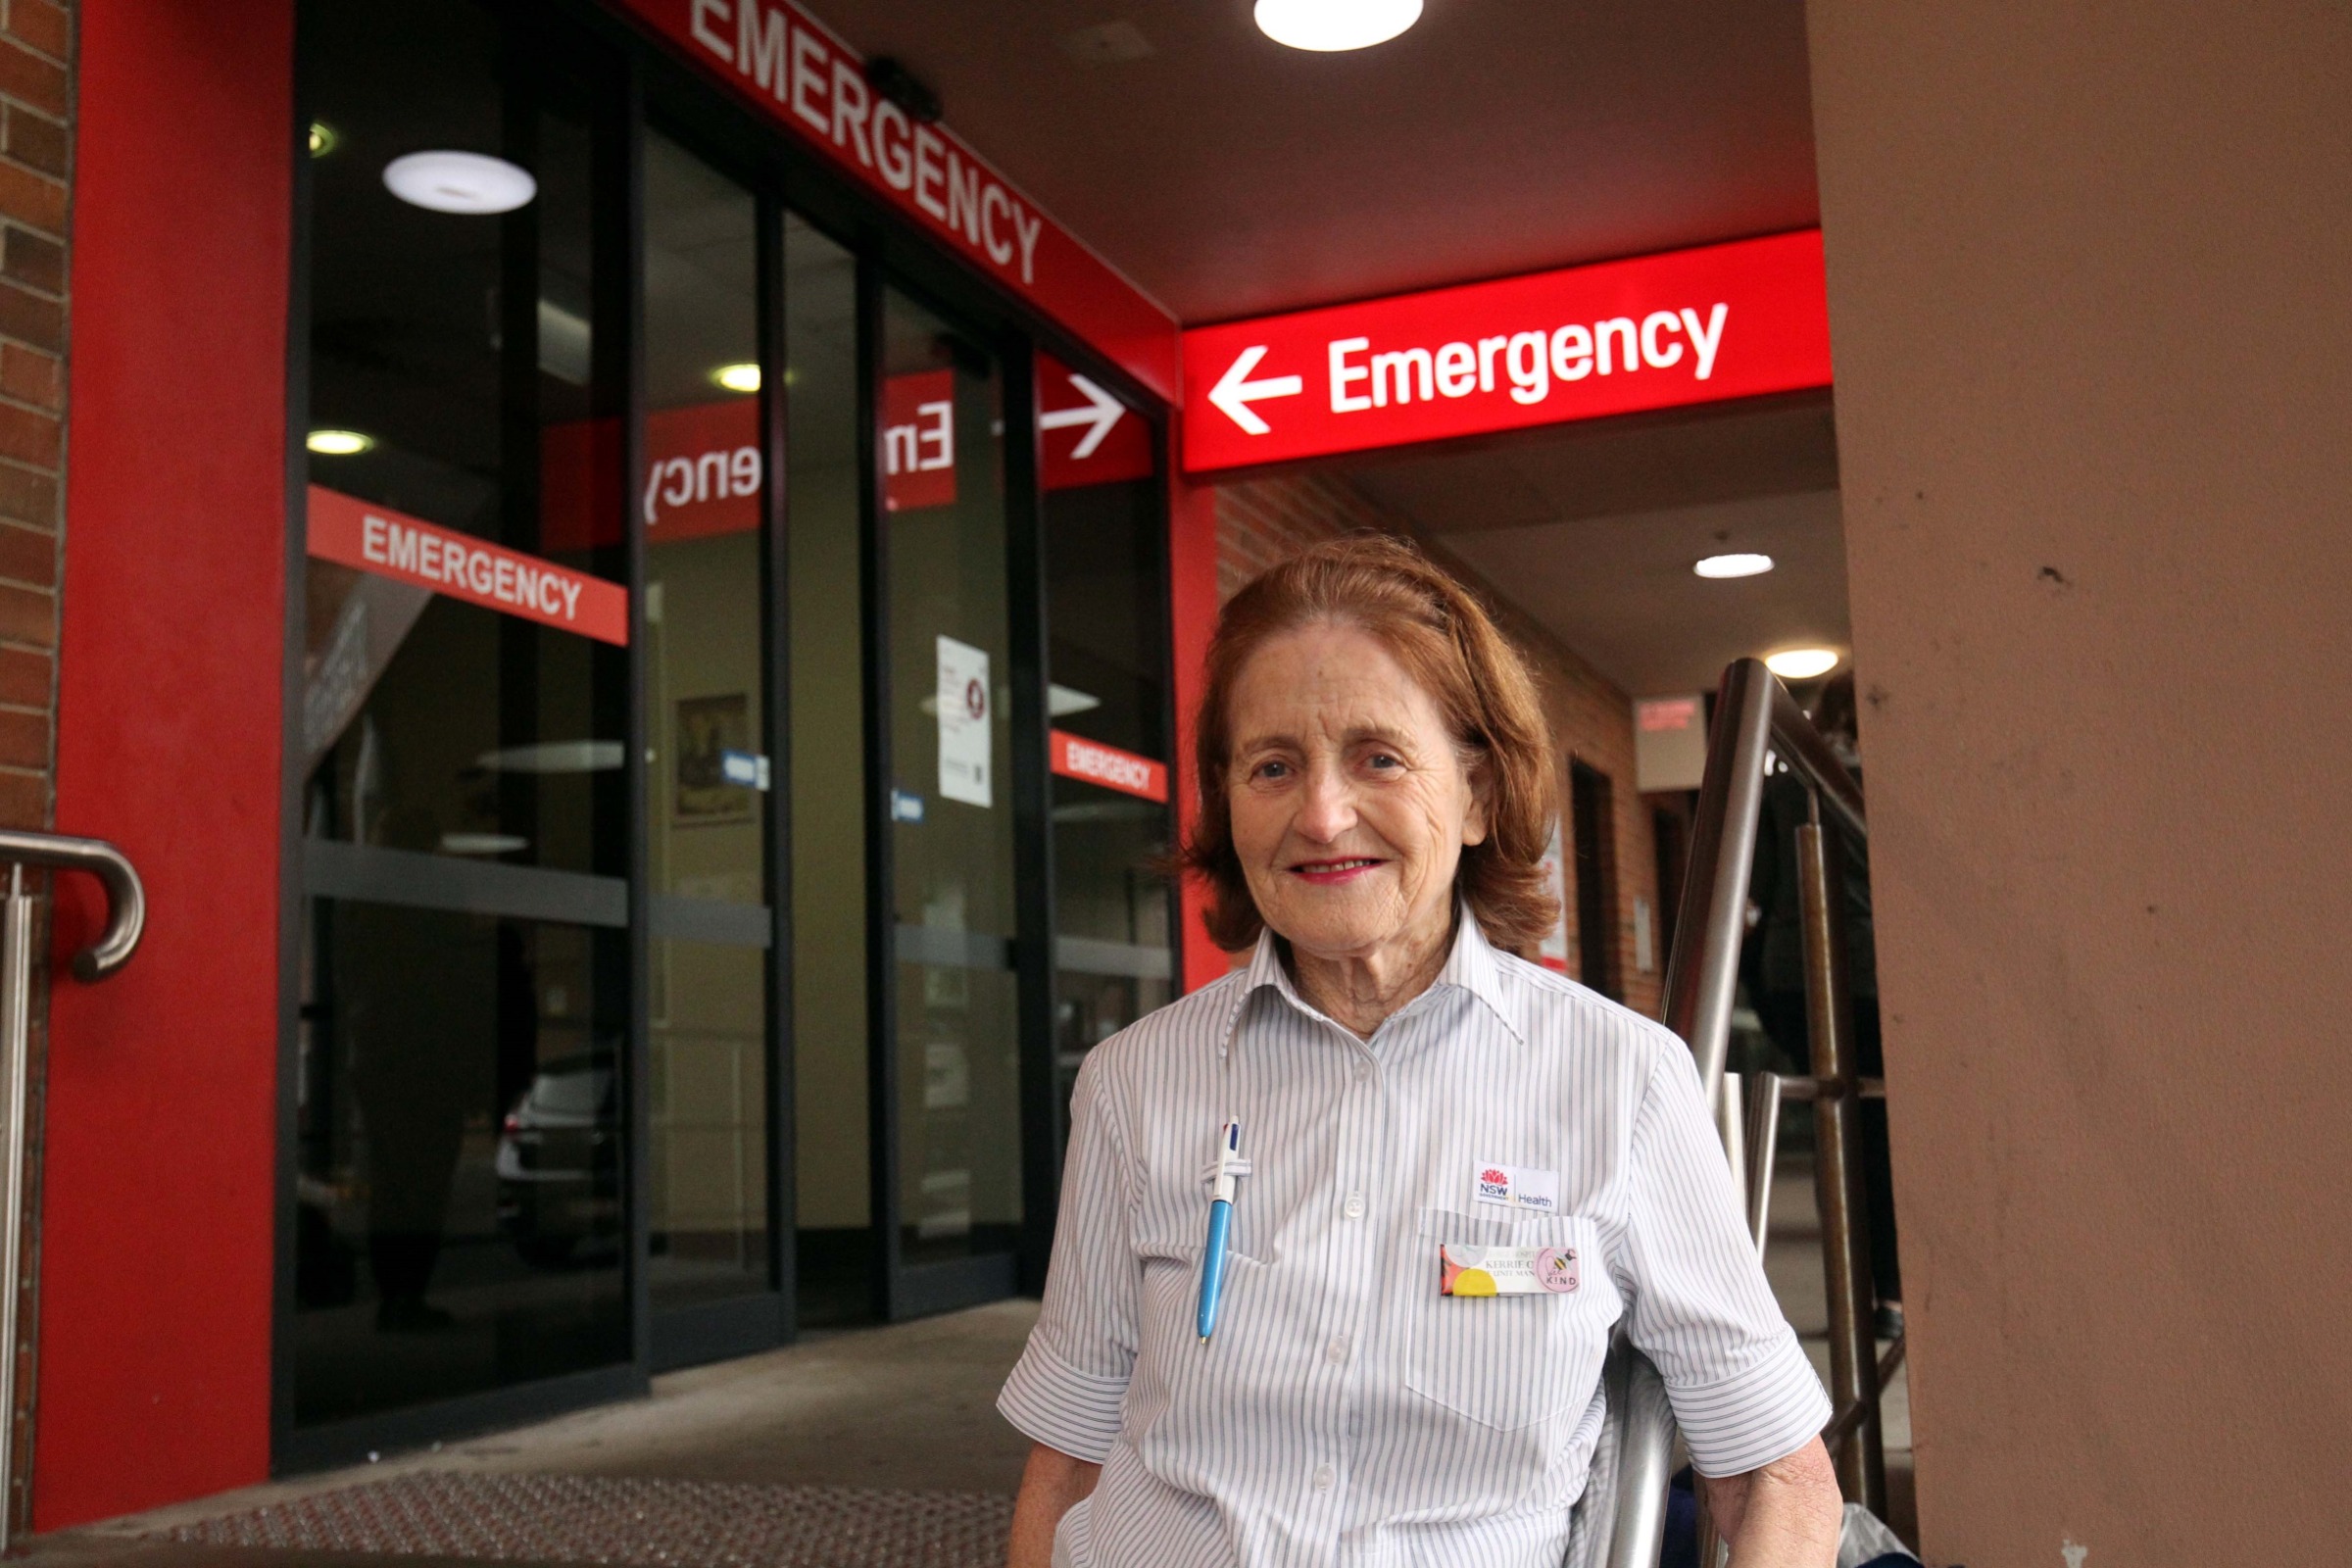 Kerrie Osterberg outside the Emergency Department at St George Hospital.